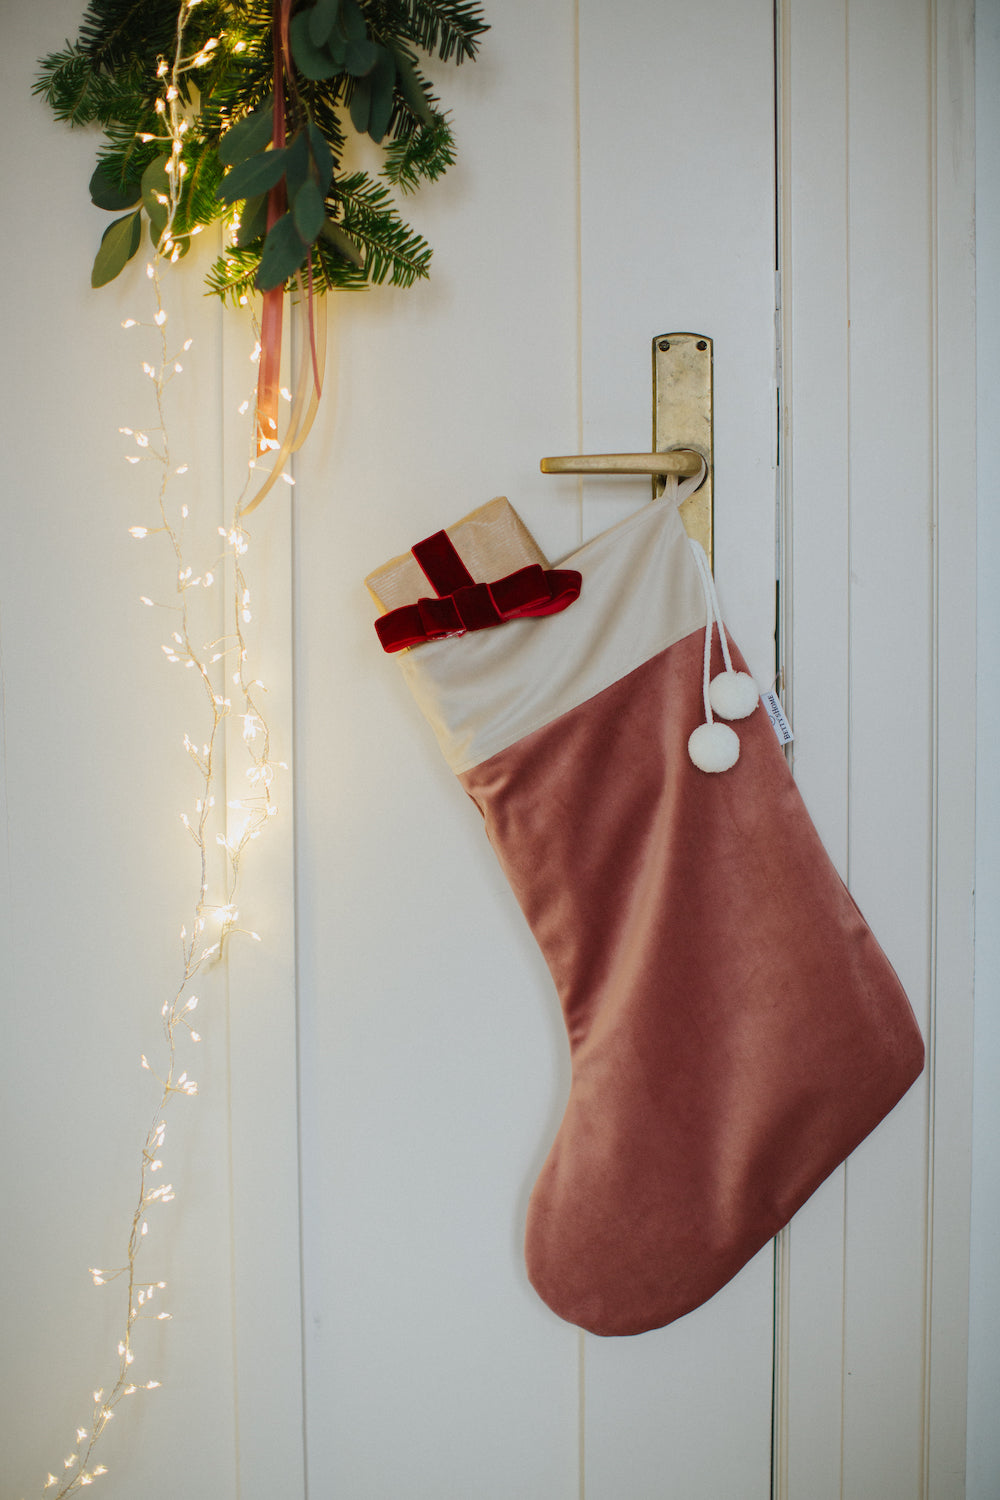 Christmas stocking pink by Bettys Home Hanging on a door handle with a small gift sticking out of the stocking